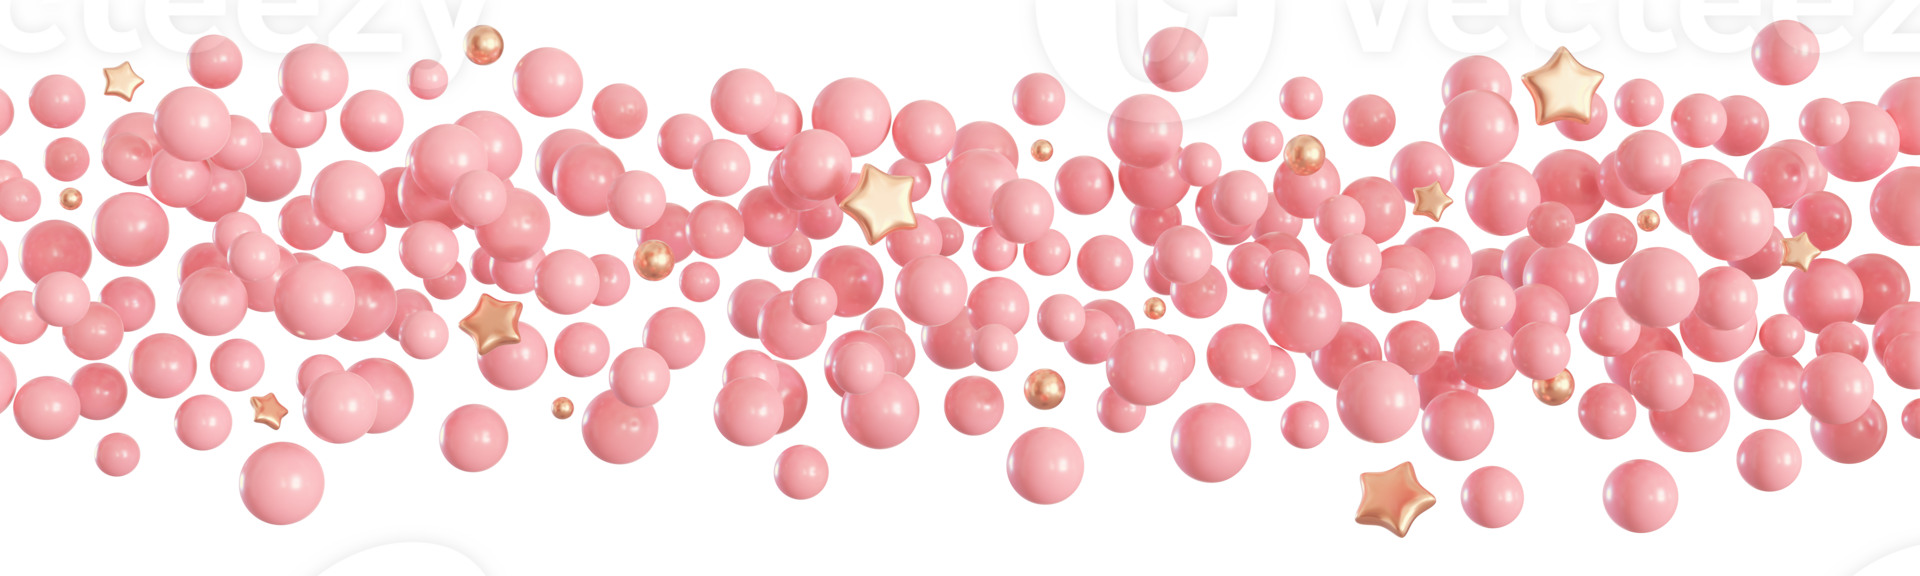 Pink balloons line on transparent background. It's a girl foreground. Border, row. Cut out graphic design elements. Happy birthday, party, baby shower decoration. Helium balloon group. 3D render. png